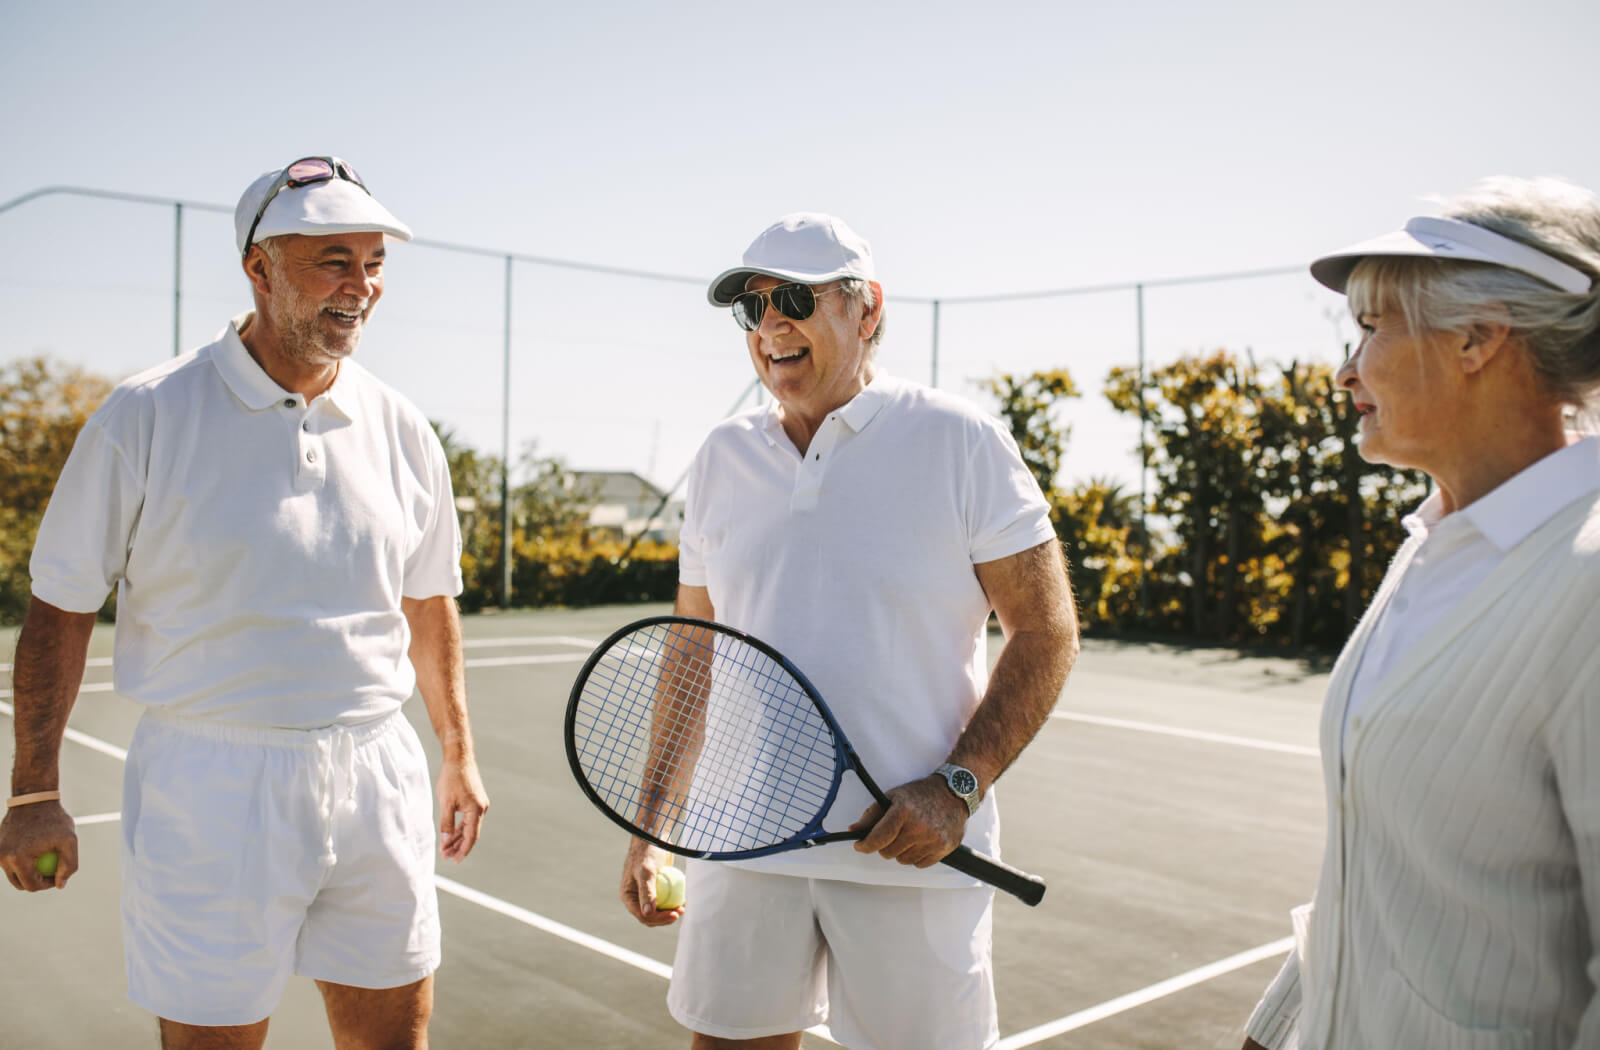 a group of seniors play tennis to keep active and socialize